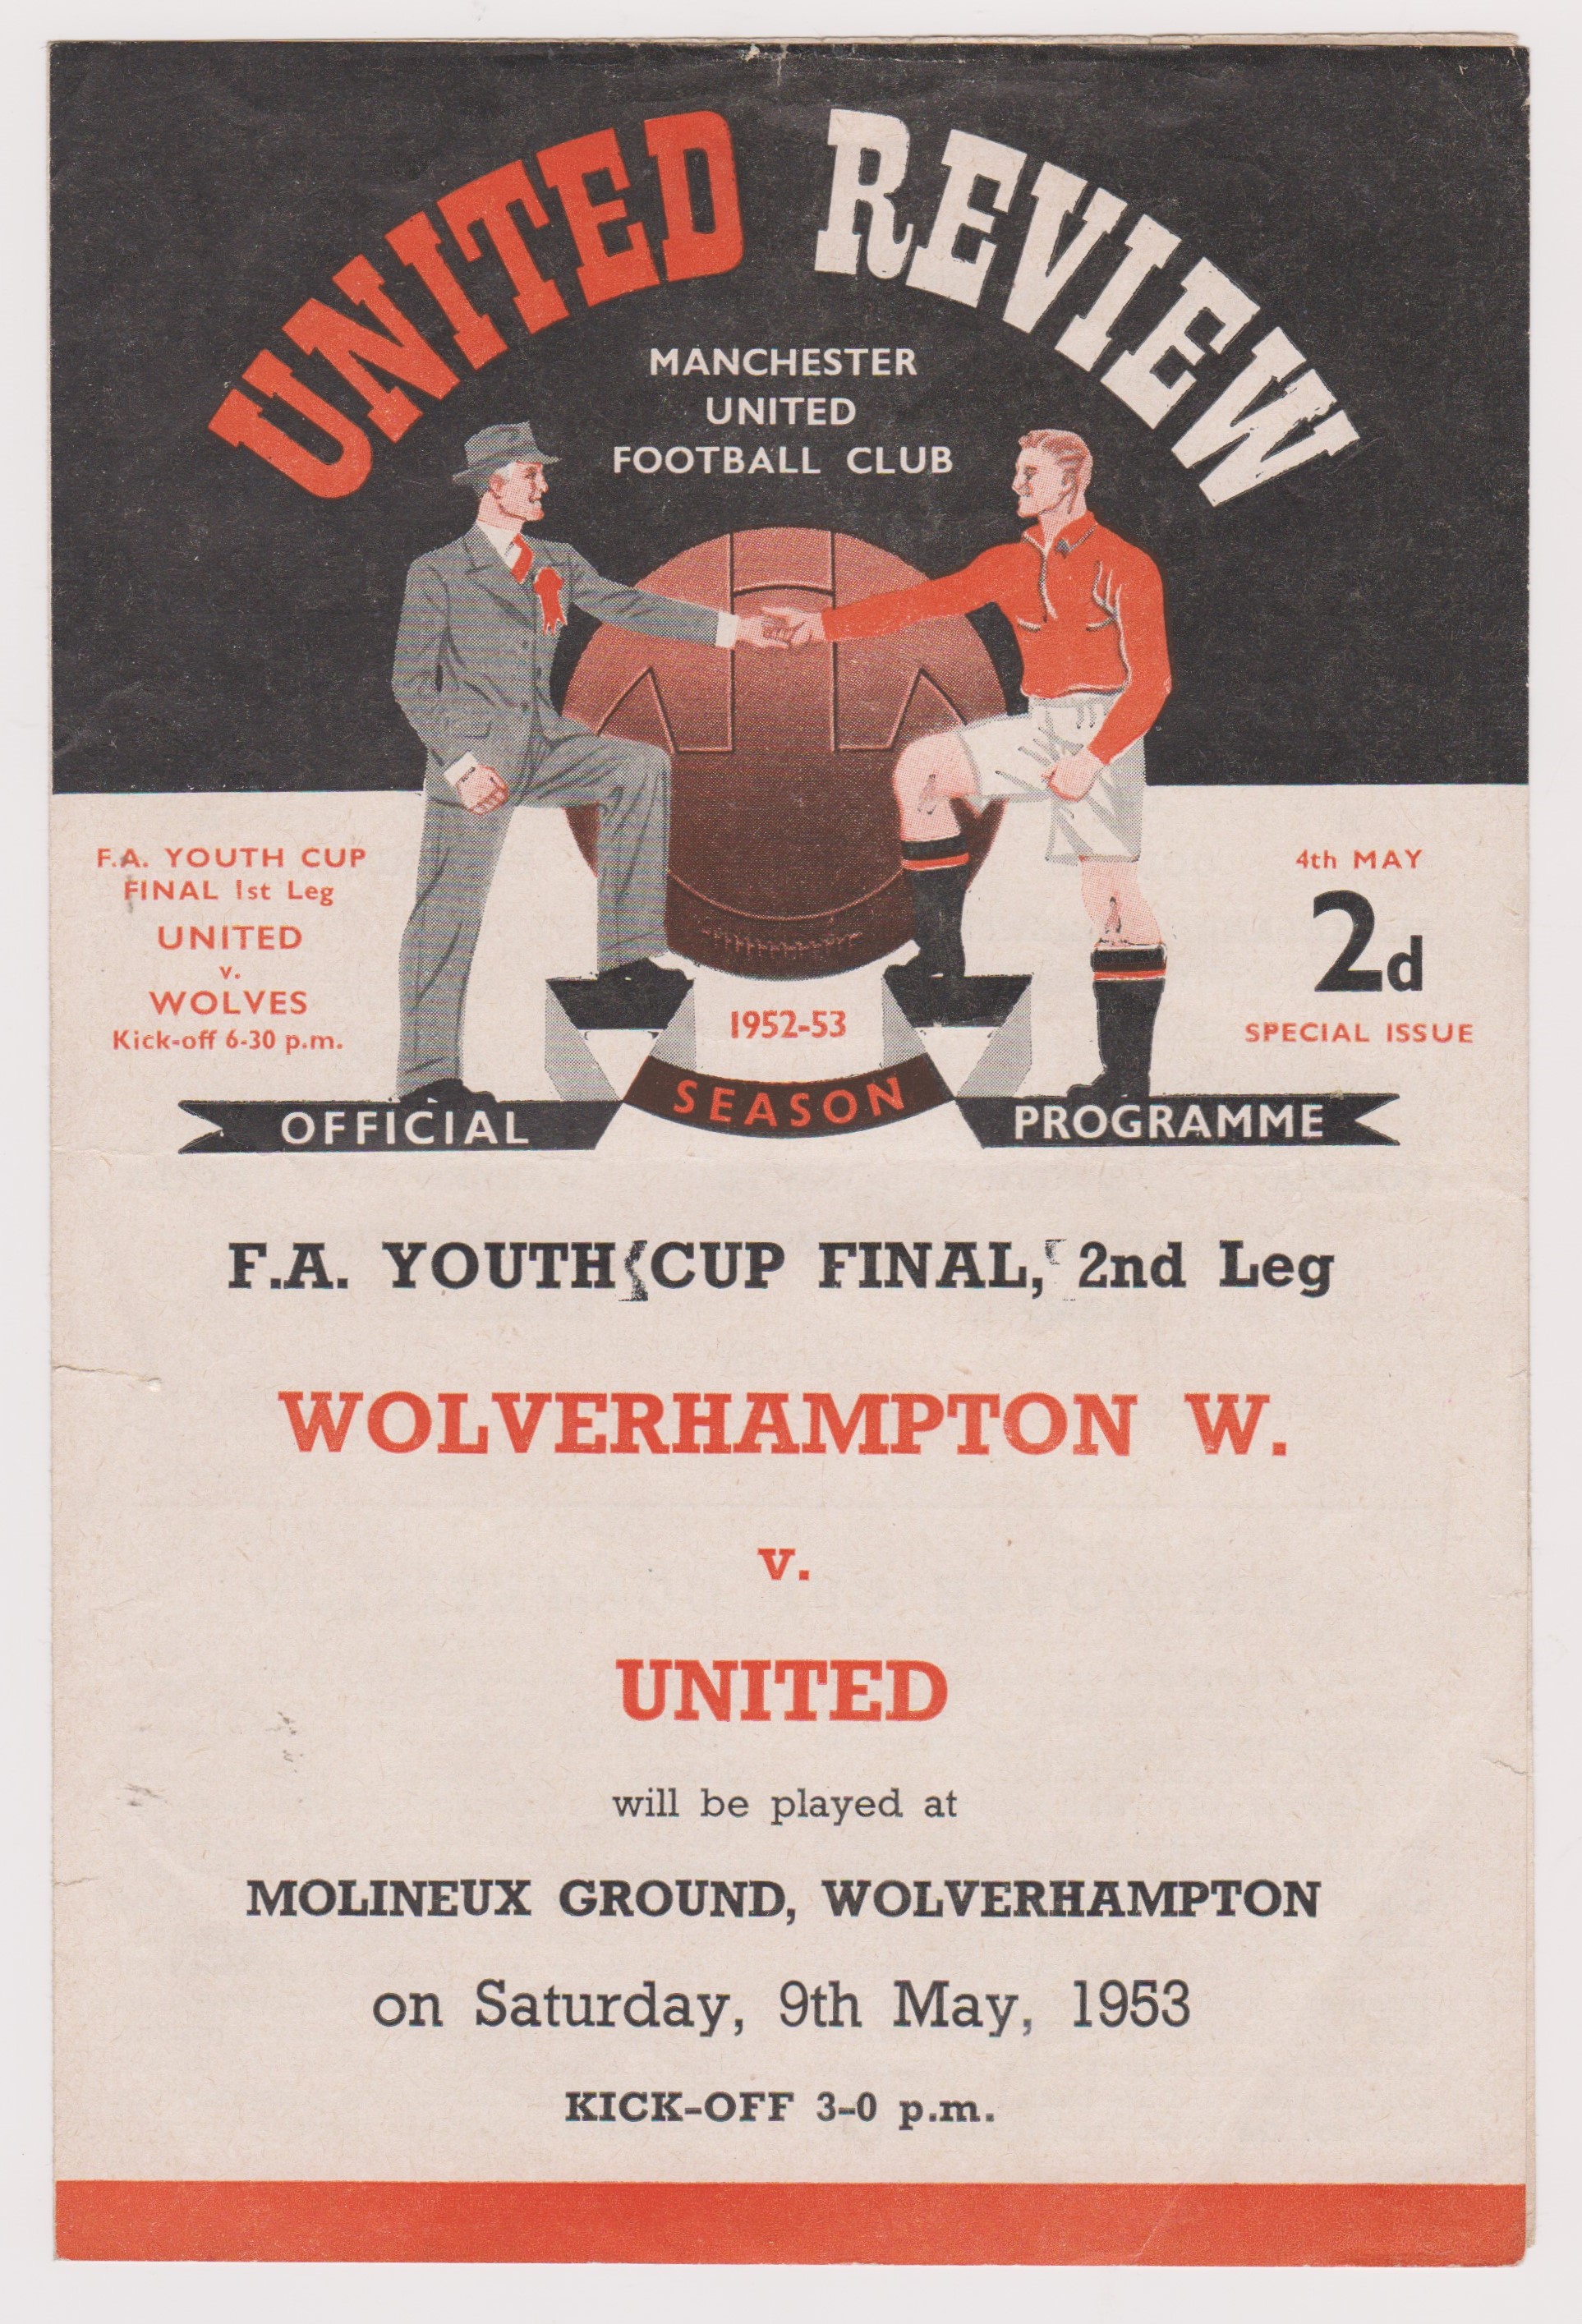 Manchester United v Wolverhampton Wanderers FA Youth Cup Final 1st Leg 4 page programme 4th May 1953